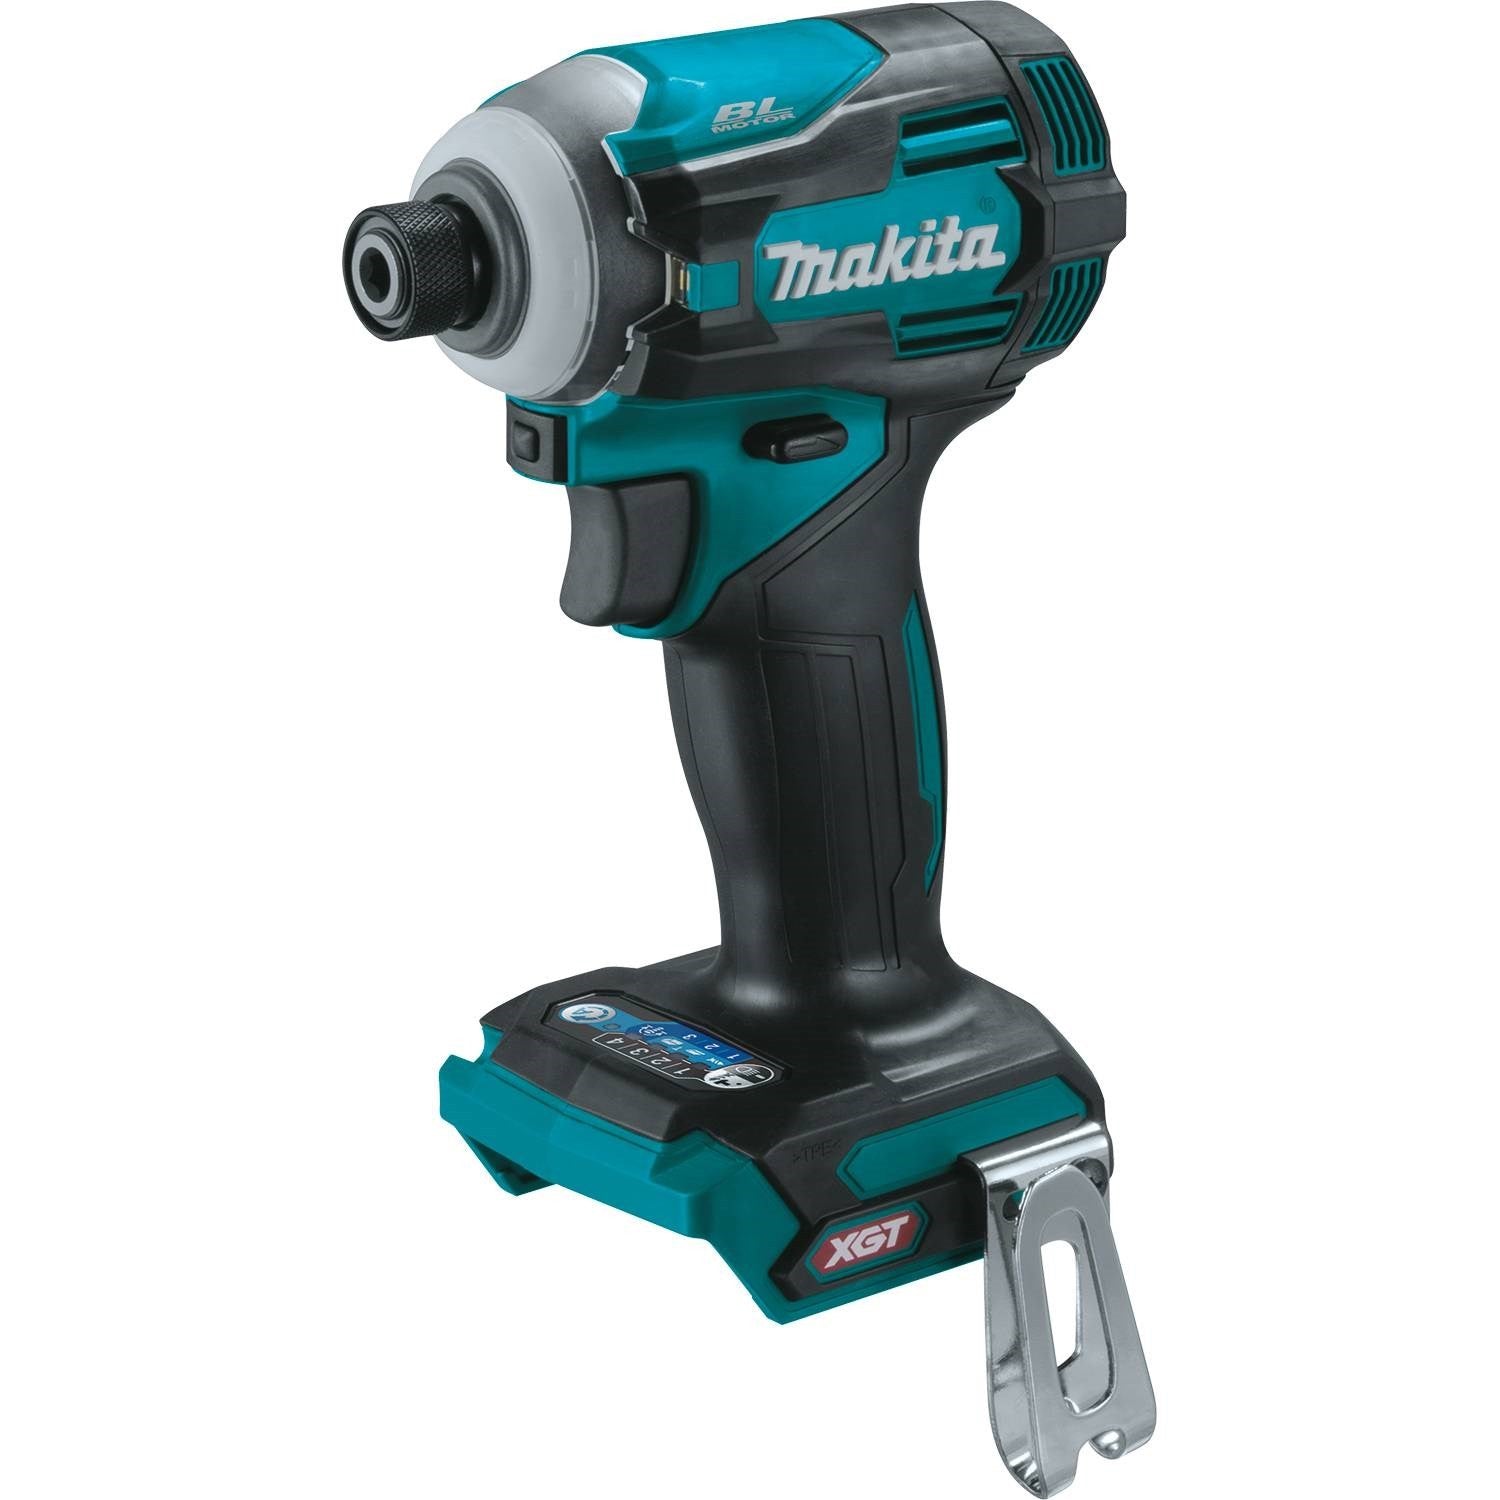 Makita GDT01Z 40V MAX XGT® 4-Speed Impact Driver, Tool Only